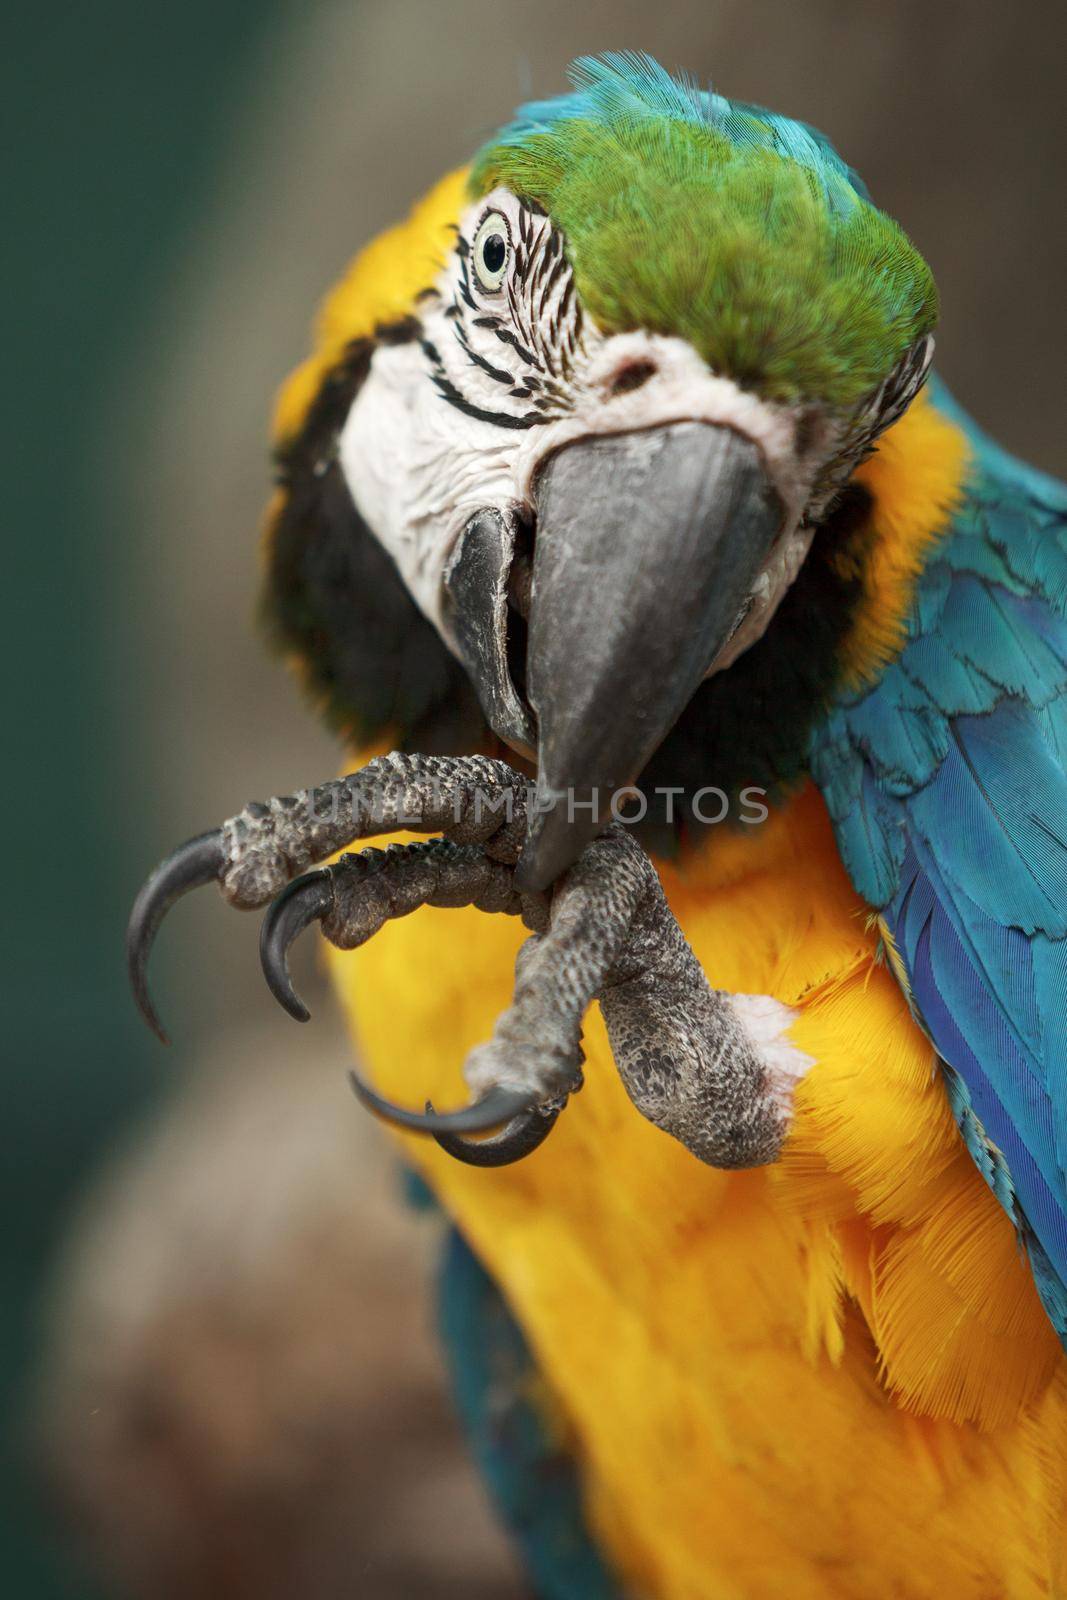 Parrot ara macao cleaning its foot.